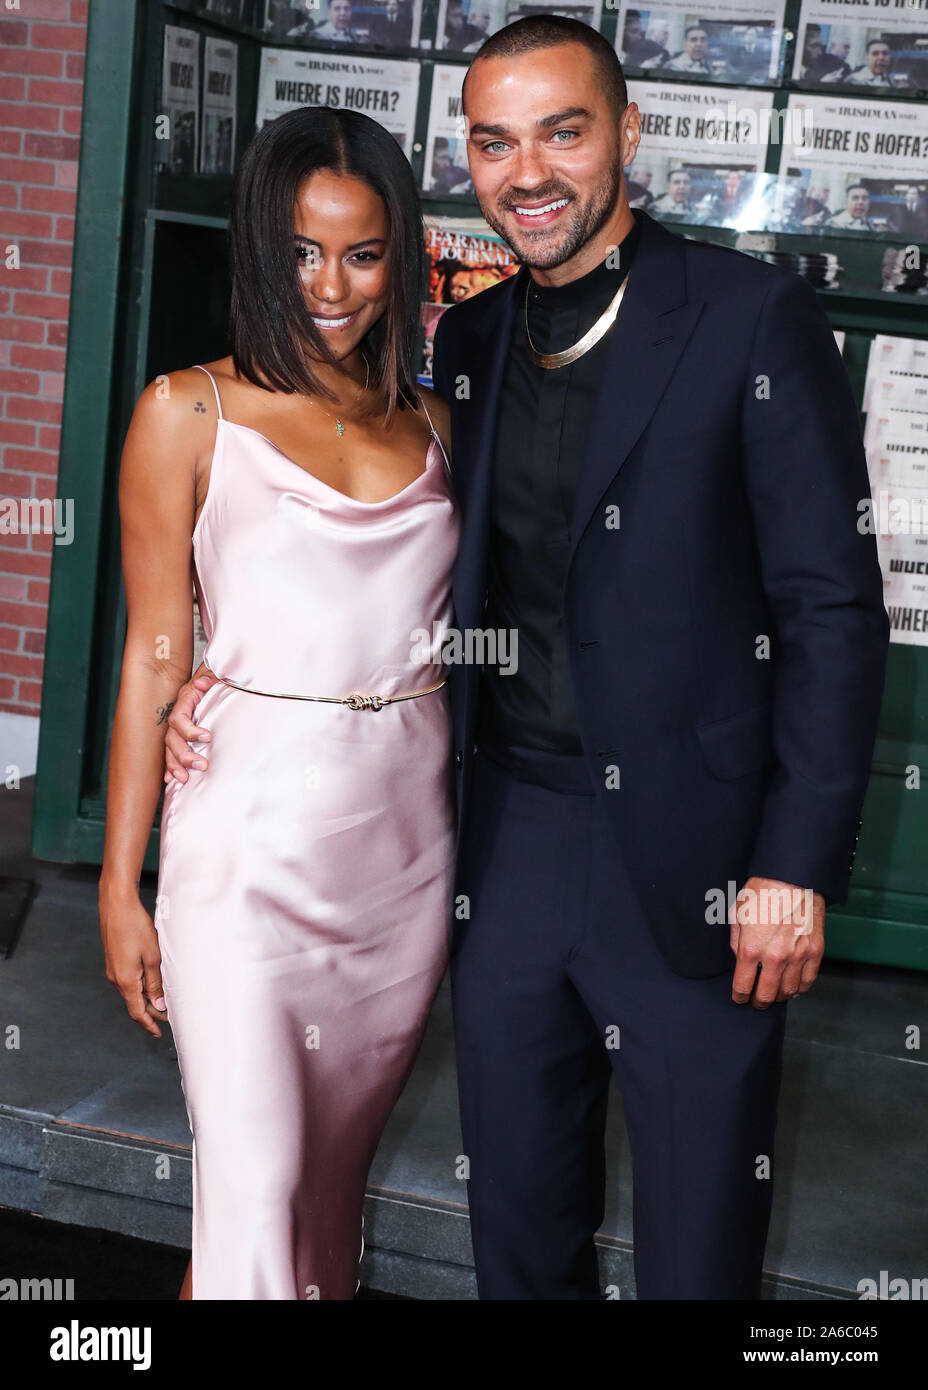 Hollywood, USA. 24th Oct, 2019. HOLLYWOOD, LOS ANGELES, CALIFORNIA, USA - OCTOBER 24: Taylour Paige and actor Jesse Williams arrive at the Los Angeles Premiere Of Netflix's 'The Irishman' held at TCL Chinese Theatre IMAX on October 24, 2019 in Hollywood, Los Angeles, California, USA. (Photo by Xavier Collin/Image Press Agency) Credit: Image Press Agency/Alamy Live News Stock Photo